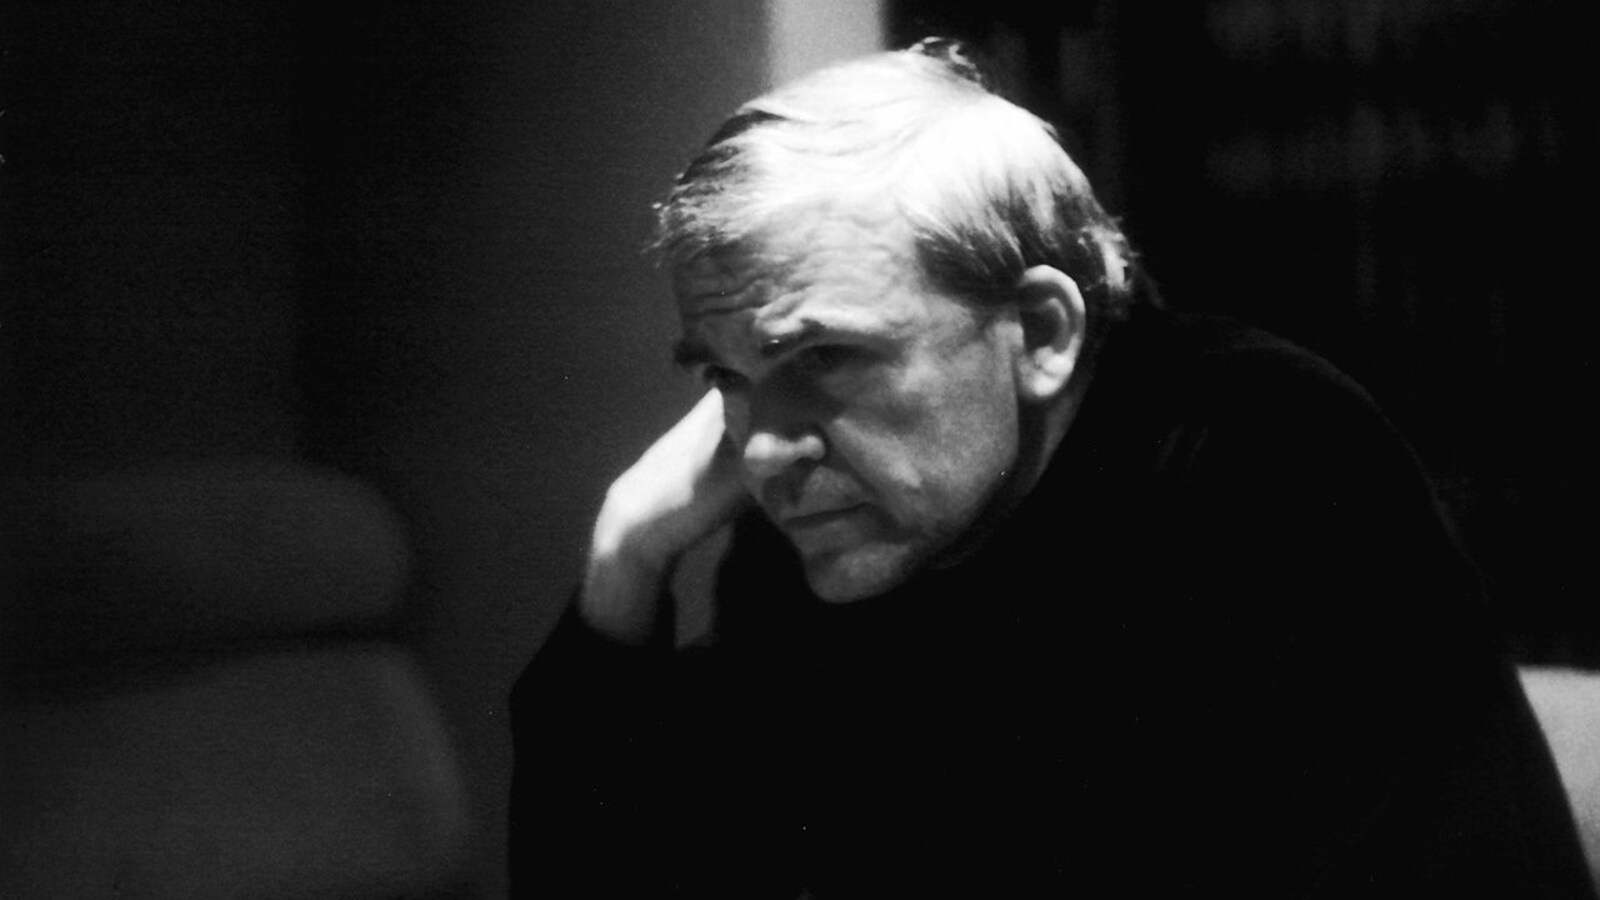 Milan Kundera: Milan Kundera, renowned Czech writer and author of 'The  Unbearable Lightness of Being,' dies at 94 - The Economic Times